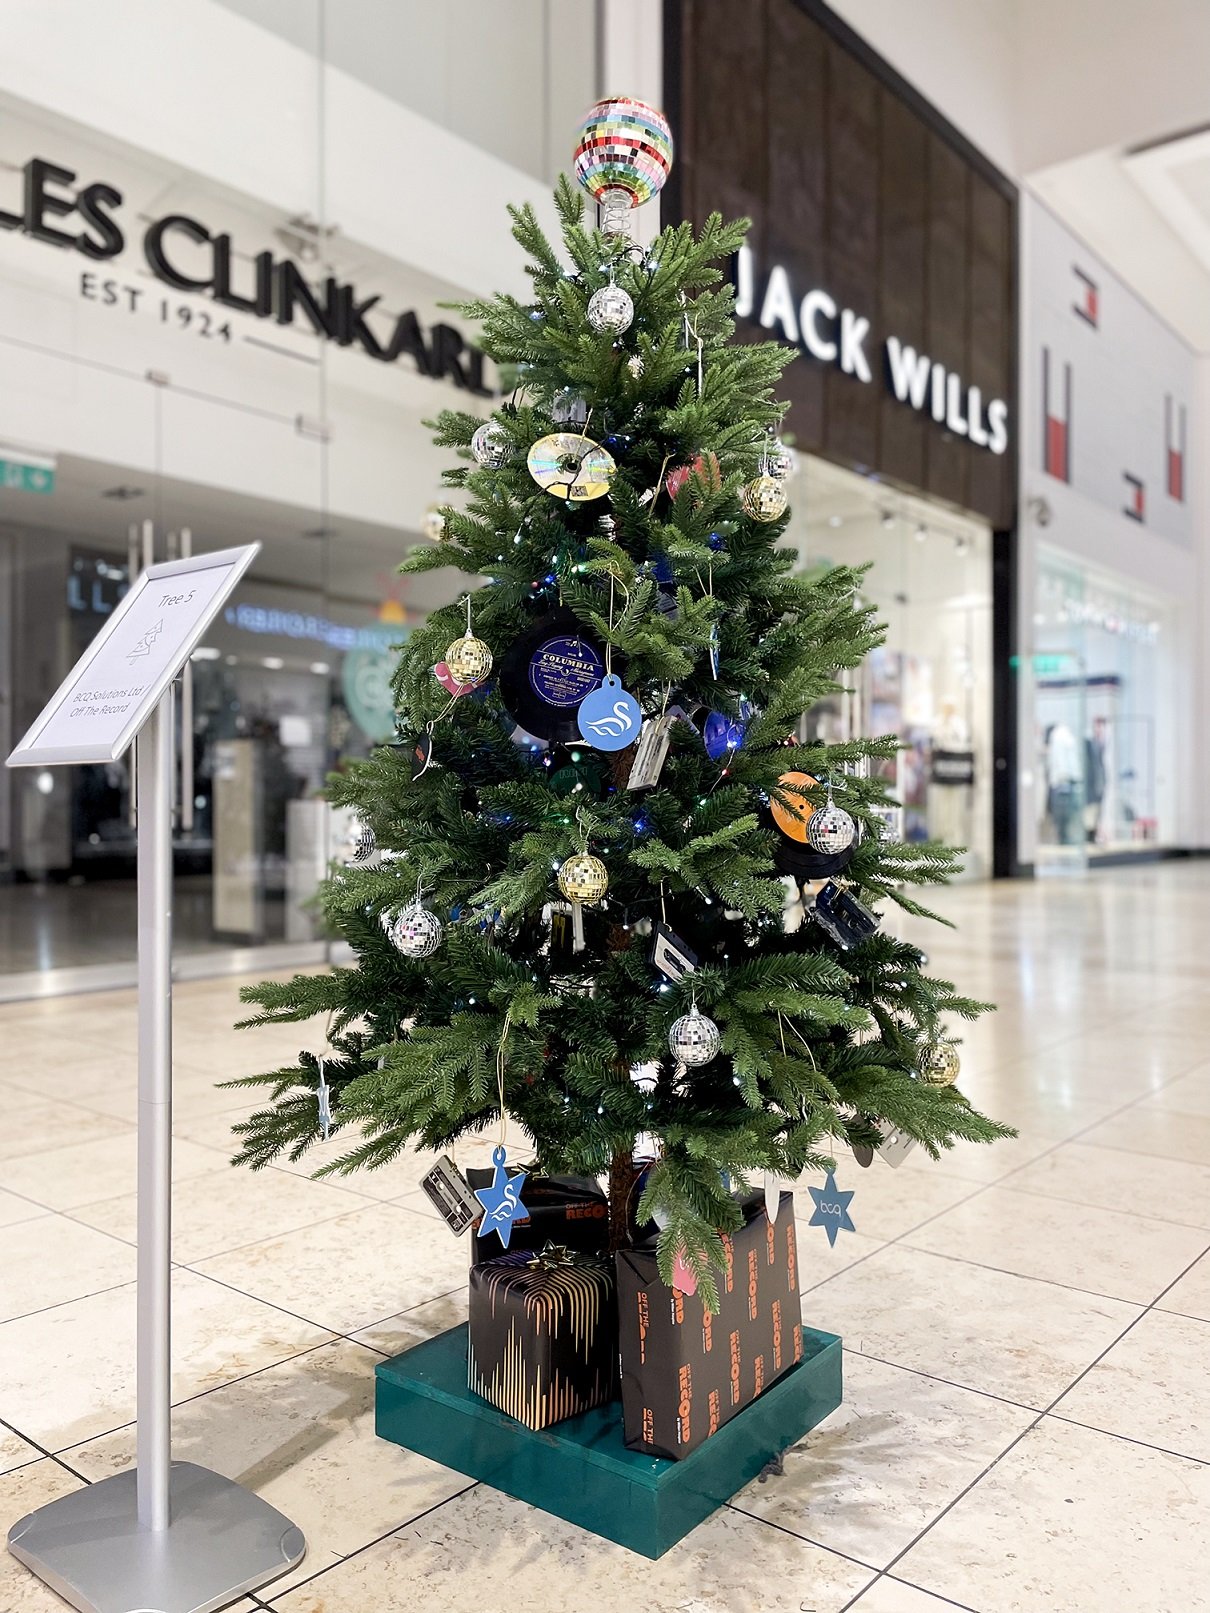 Midsummer Place’s Christmas Tree Festival is live